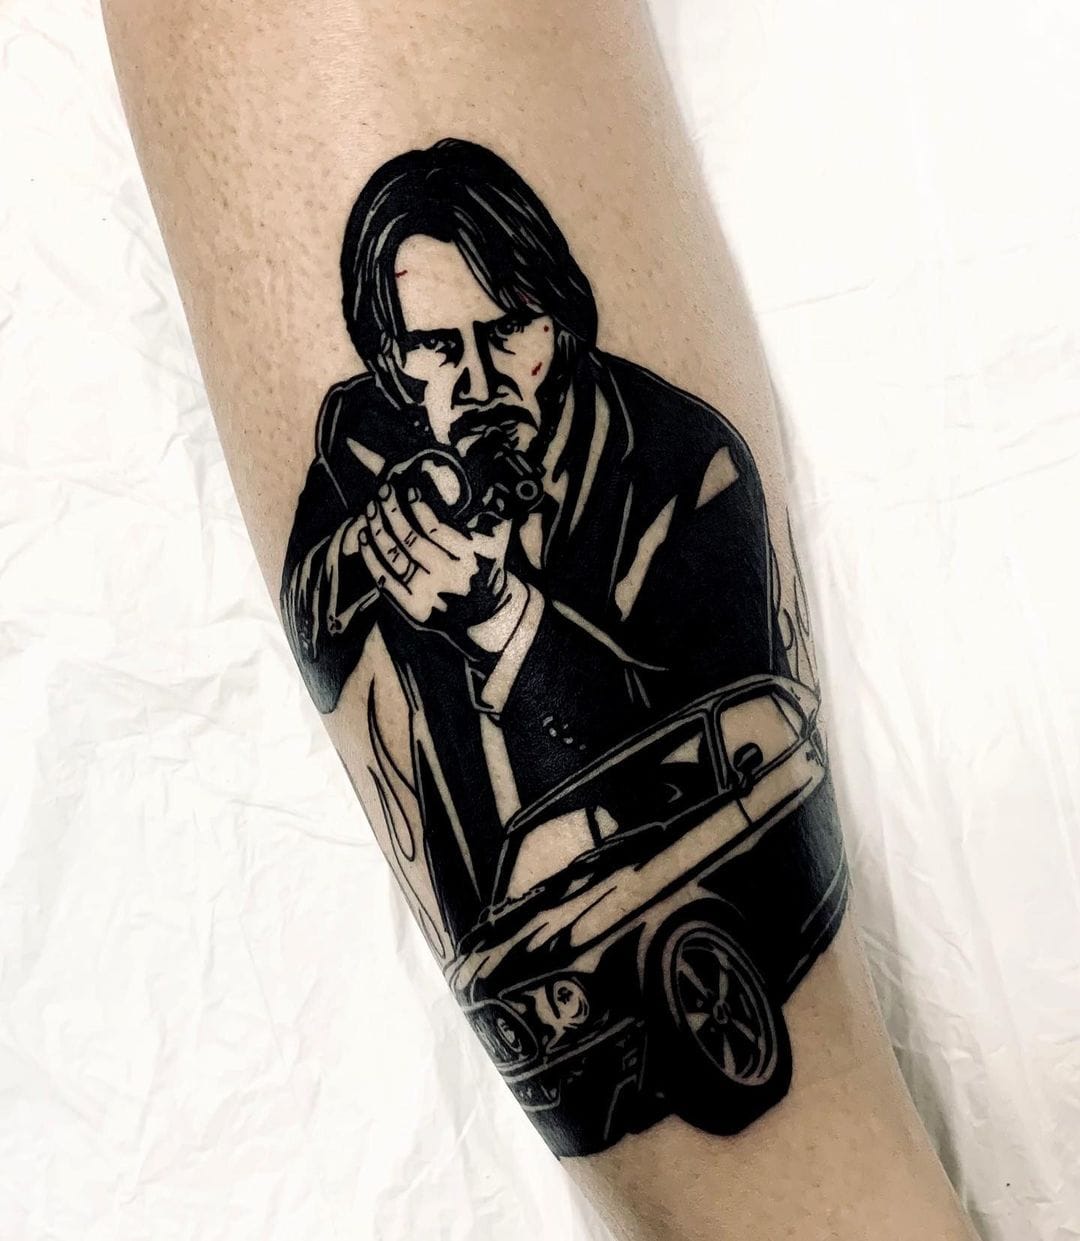 John Wick Tattoos All The Hidden Meanings Behind The Ink